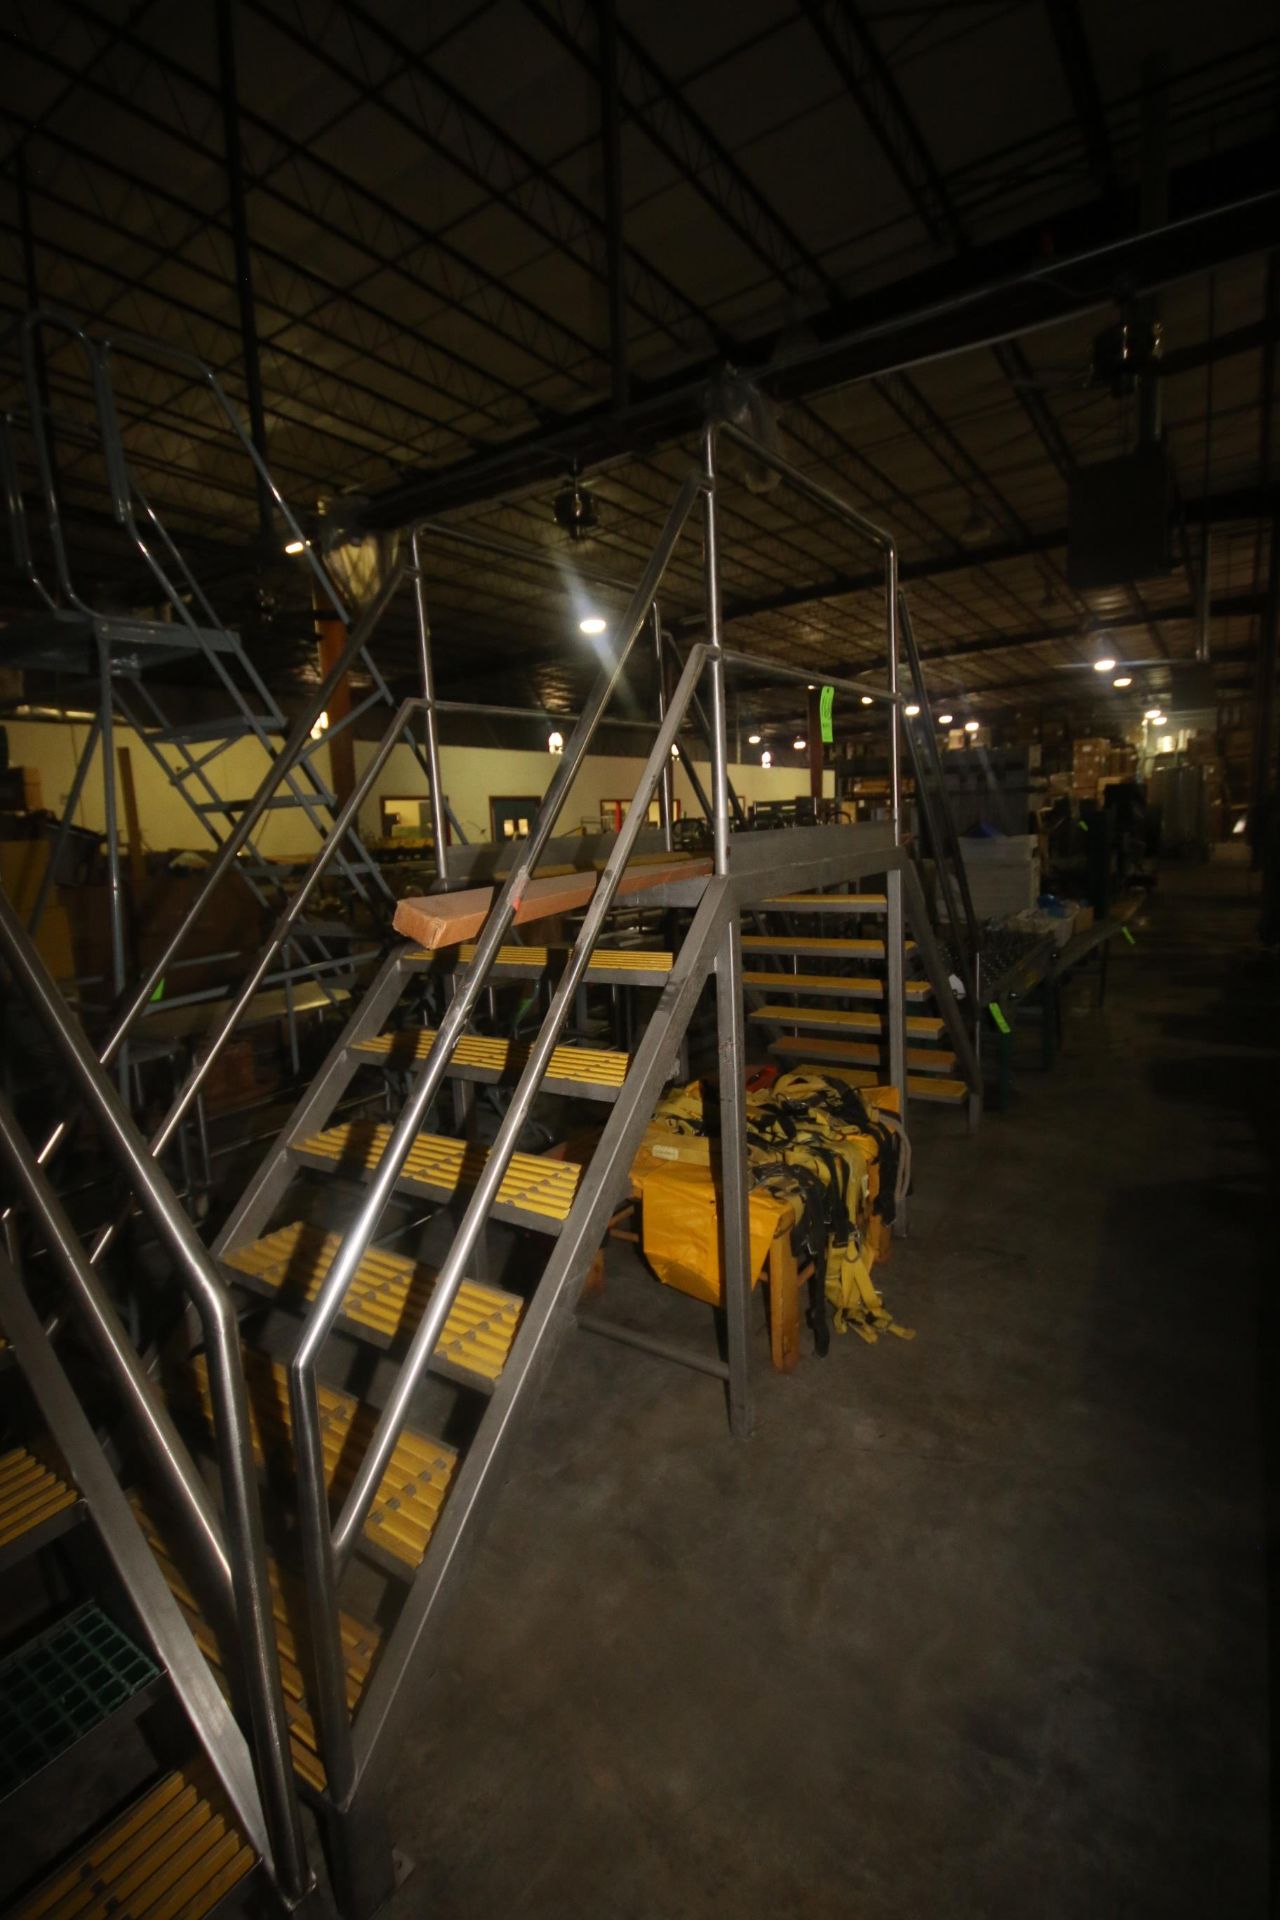 S/S Step Over Platform, with Stairs & S/S Handrails, Overall Dims.: Aprox. 13' L x 40-1/2" W x